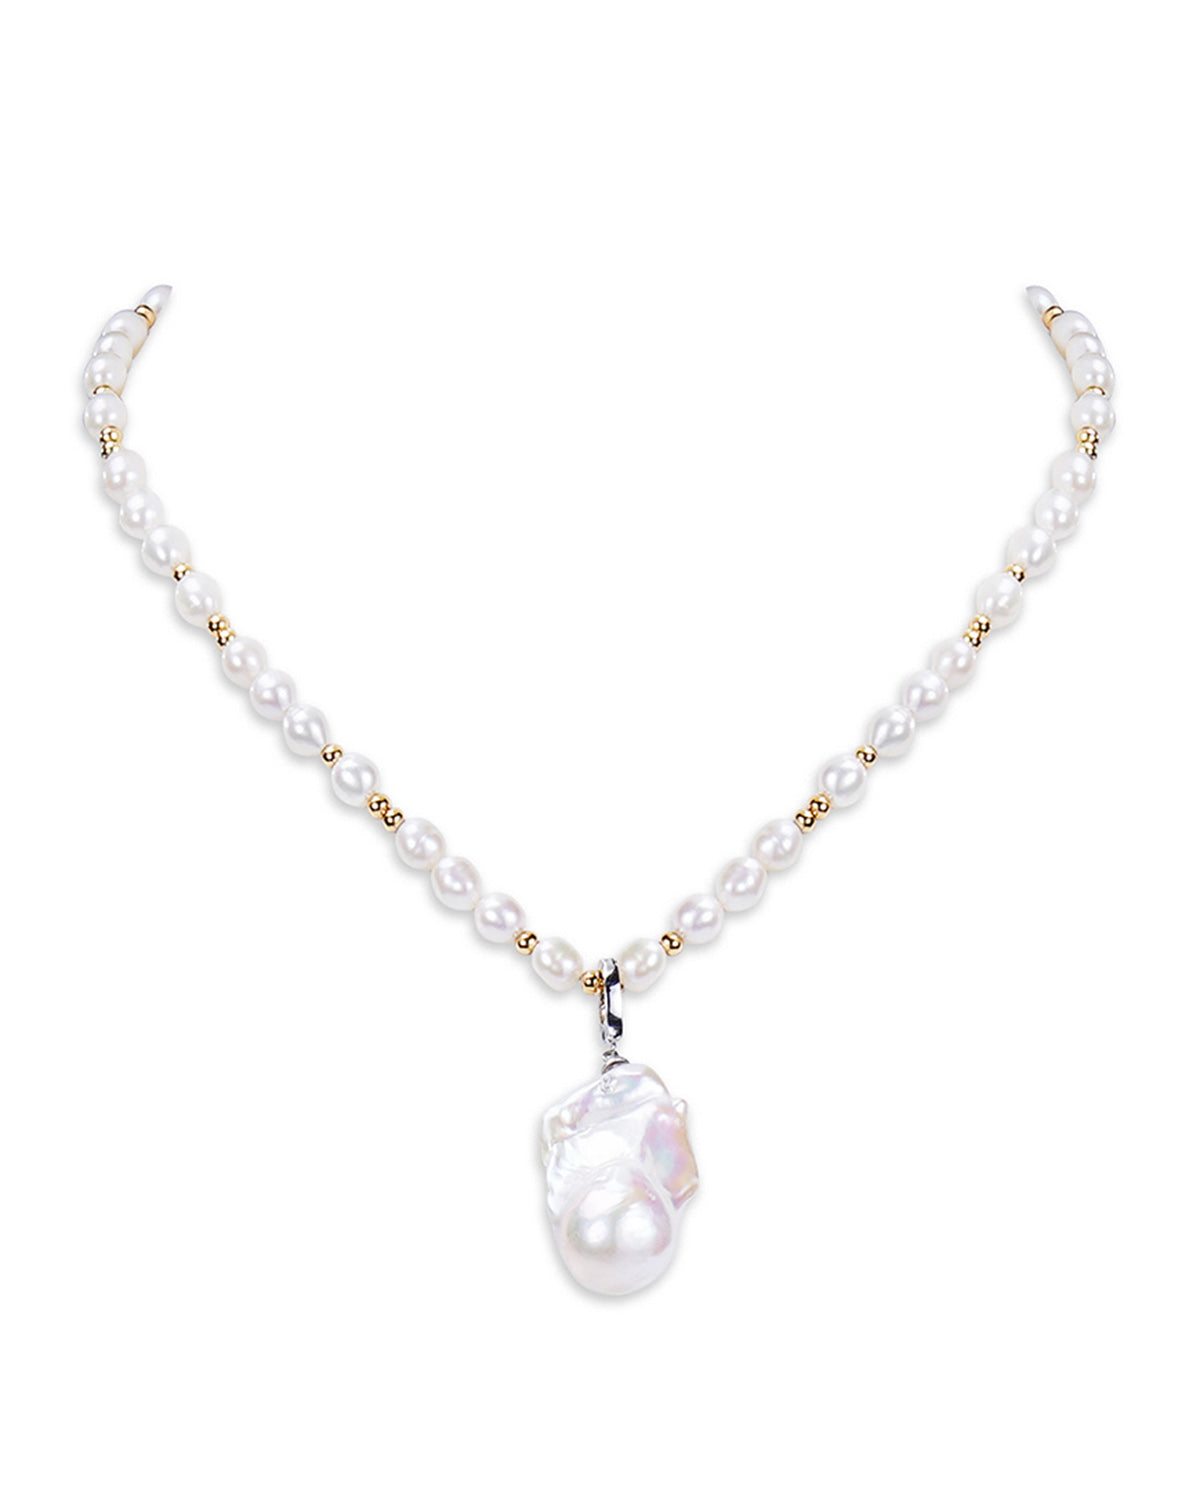 13-14mm Baroque Freshwater Pearl Radiance Pendant